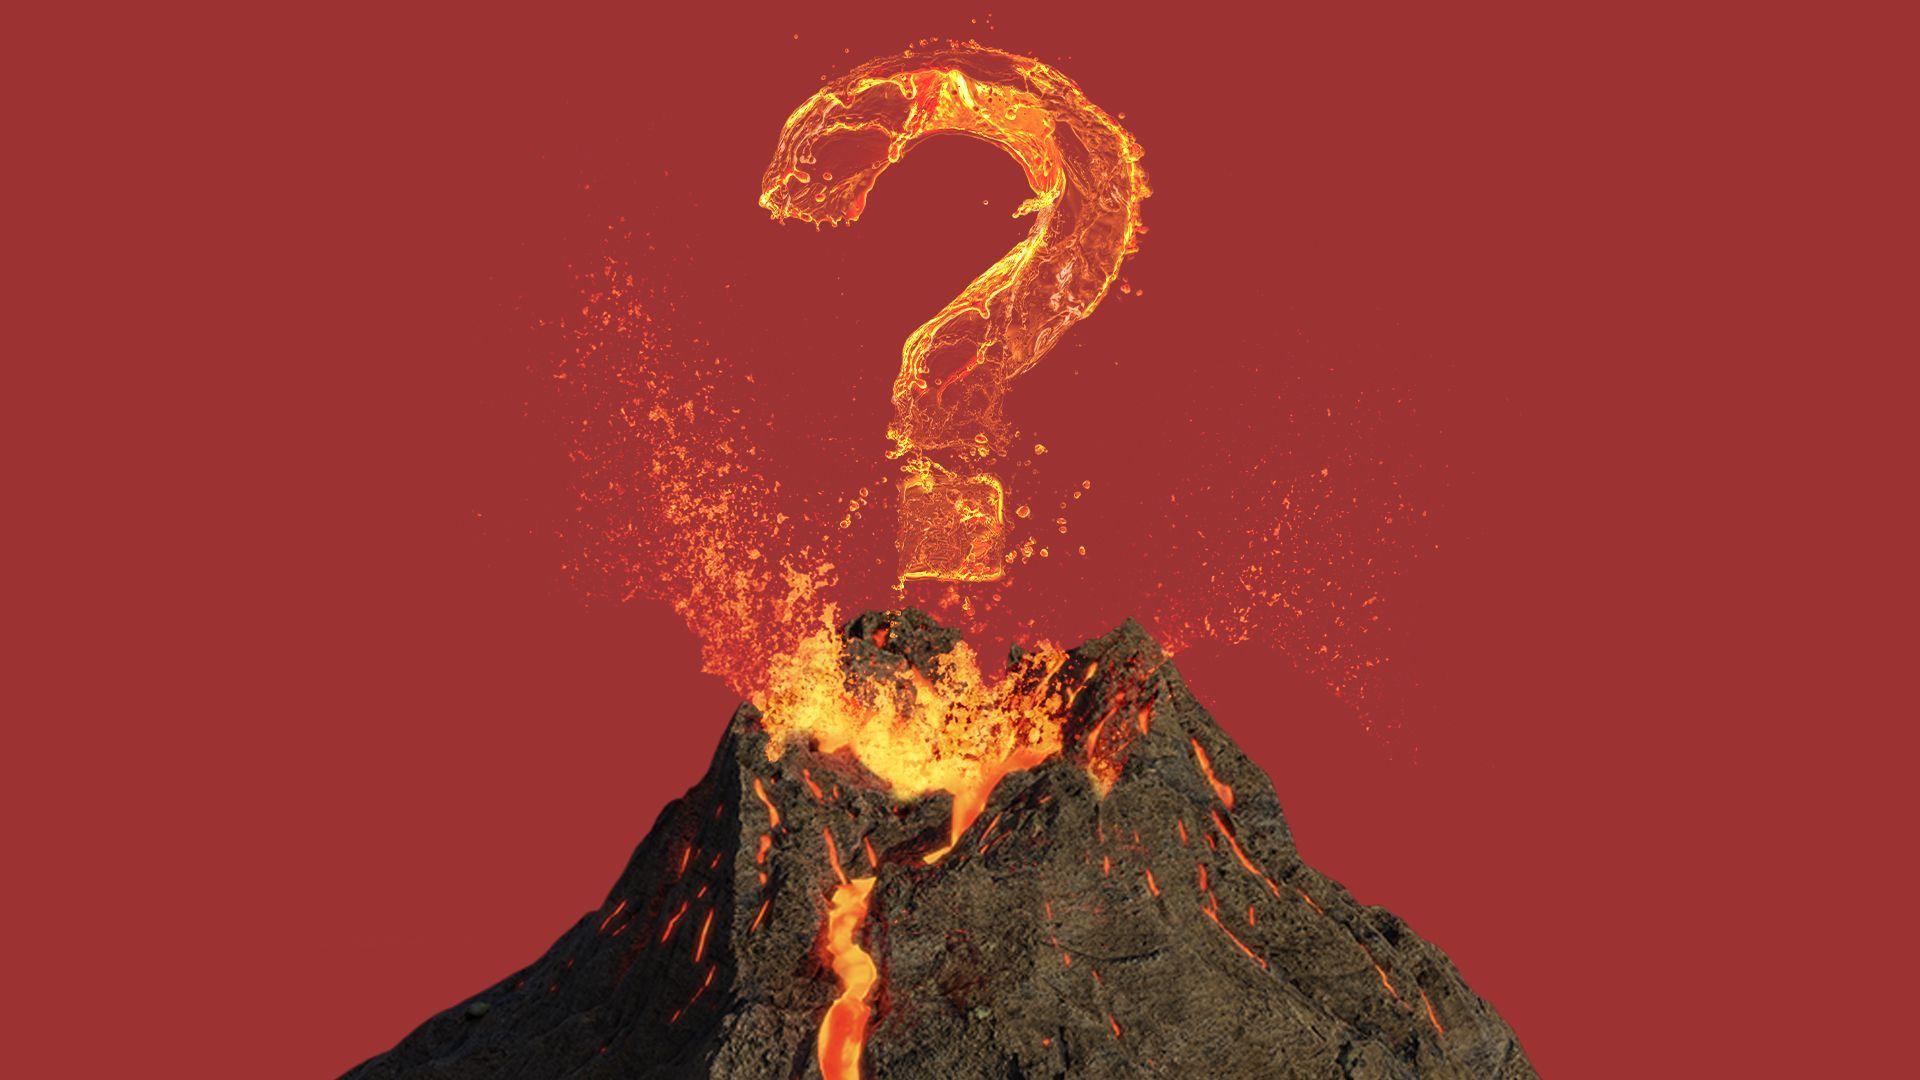 Illustration of a volcano erupting and creating a question mark from lava